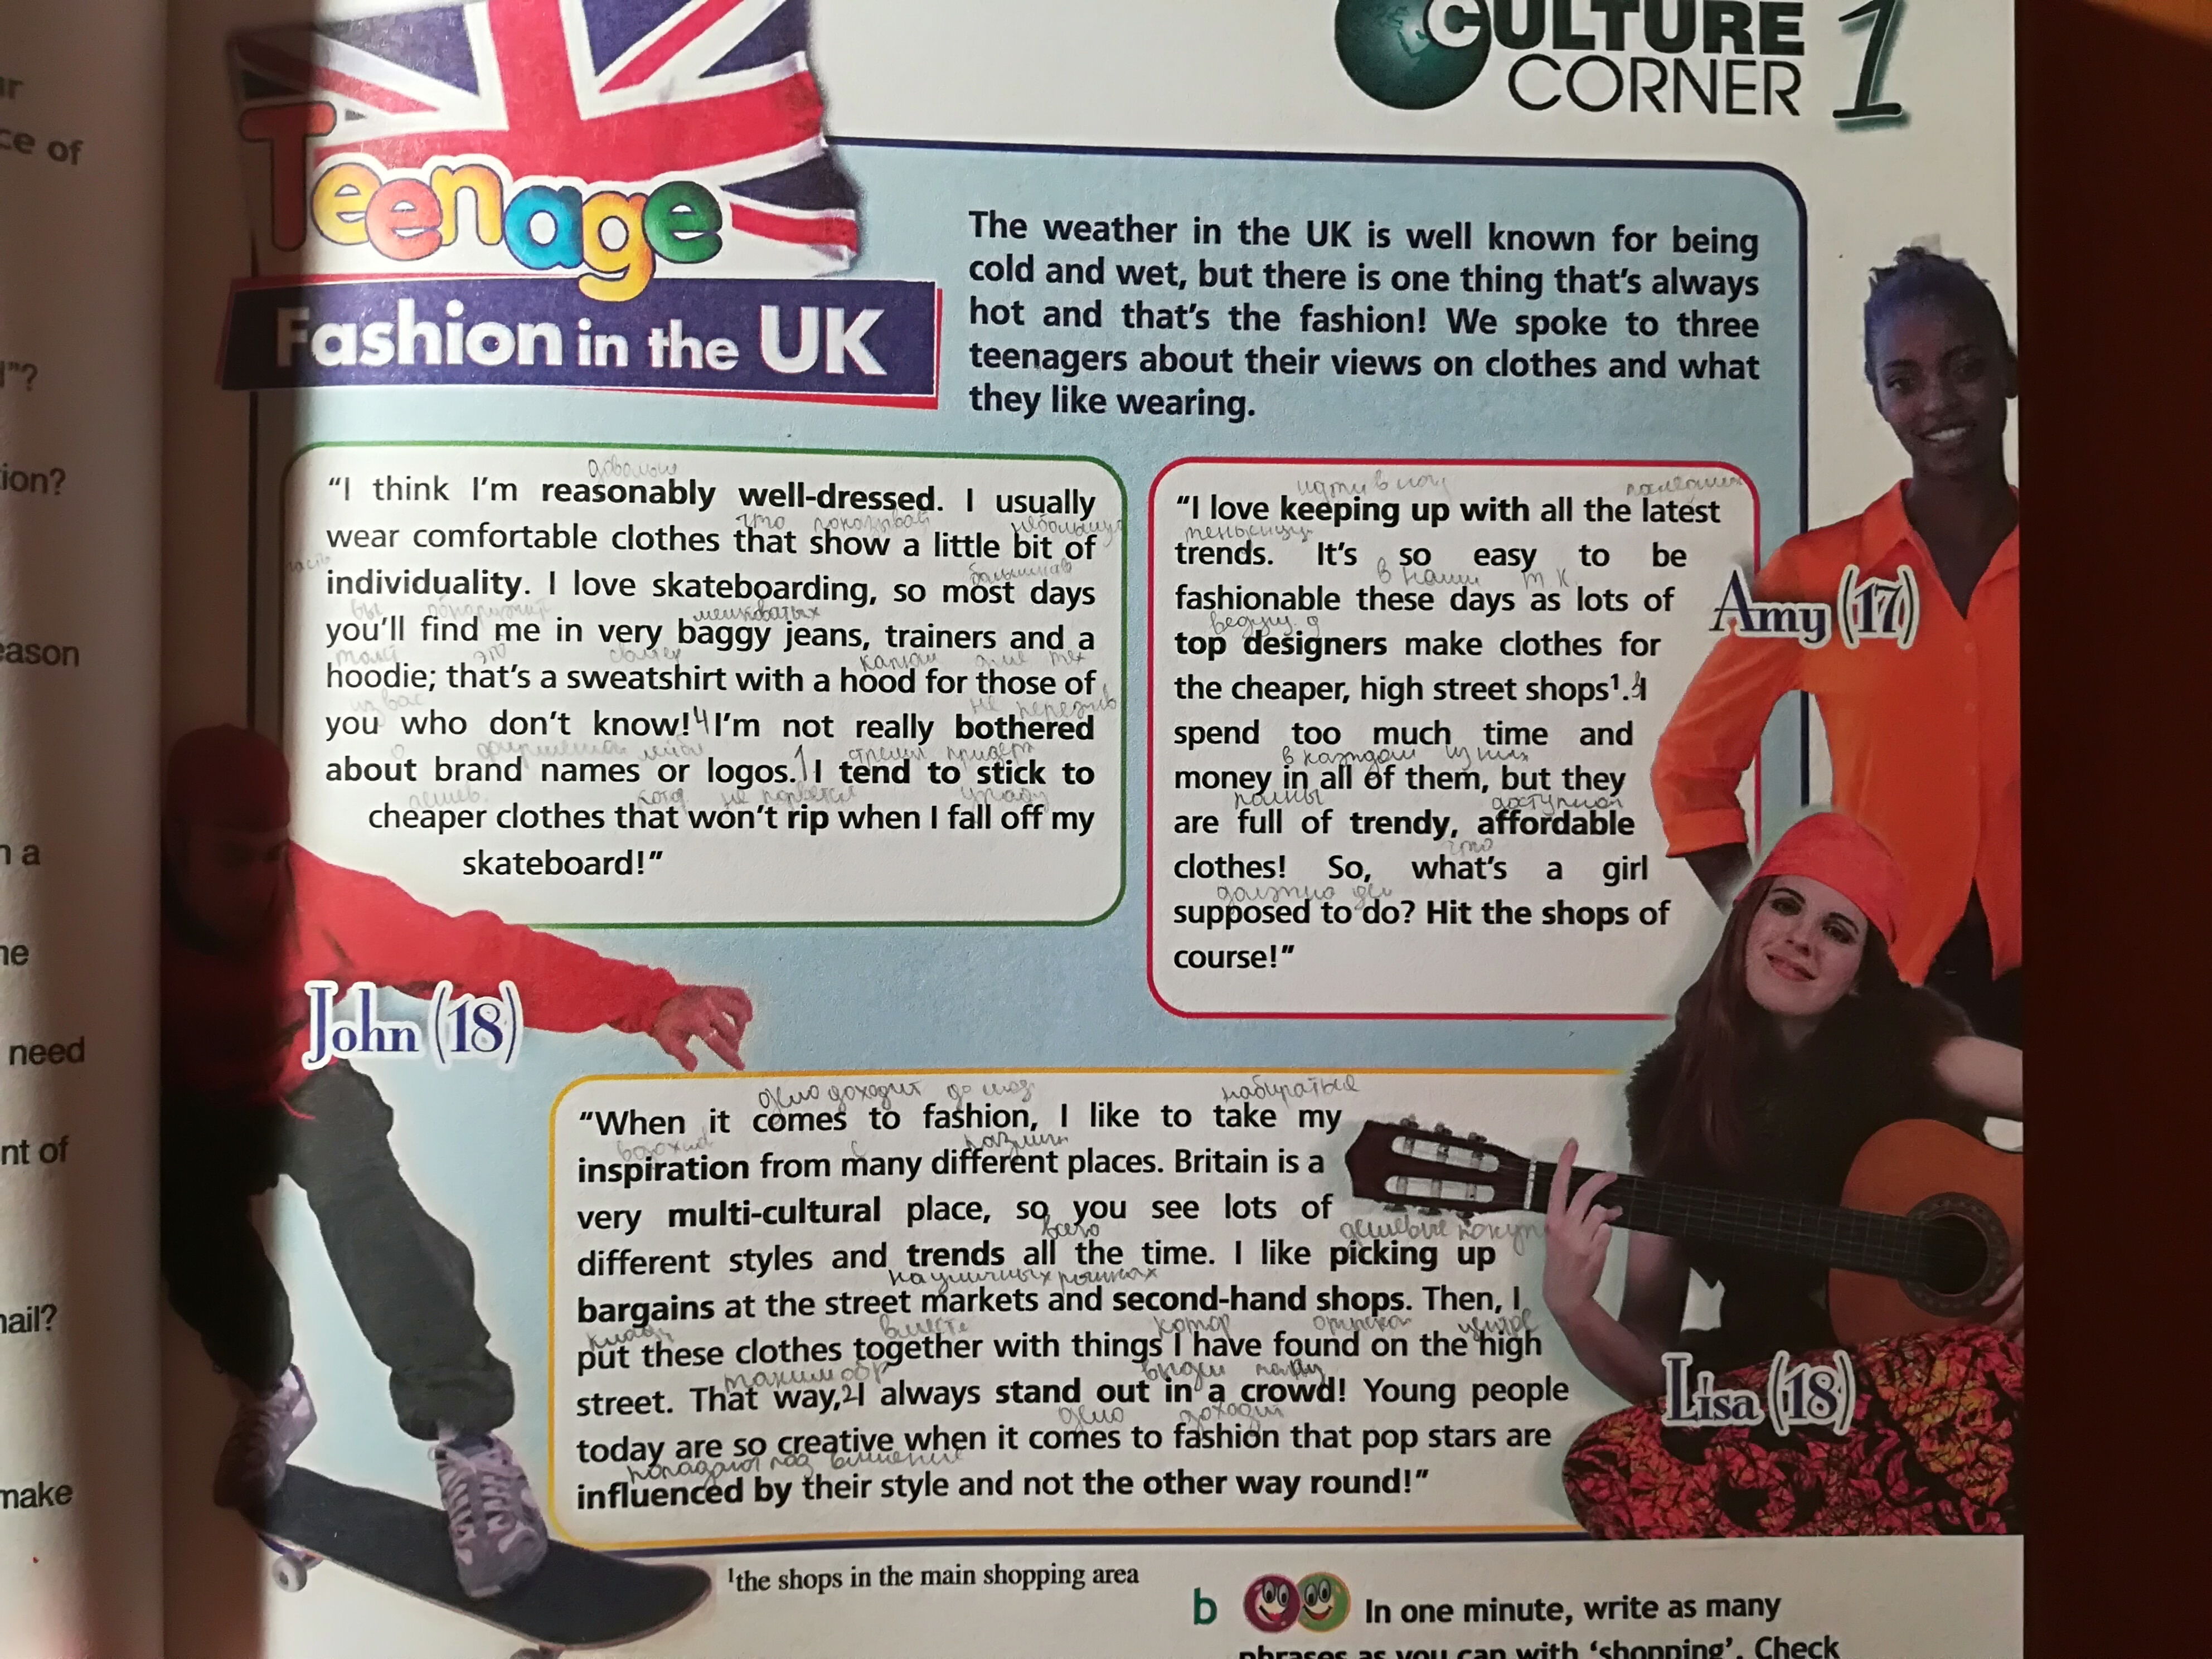 What they like wear. Teenage Fashion in the uk текст. Задать 5 вопросов к тексту teenage Fashion in the uk. Перевод текста Culture Corner. Answer that and stay fashionable.